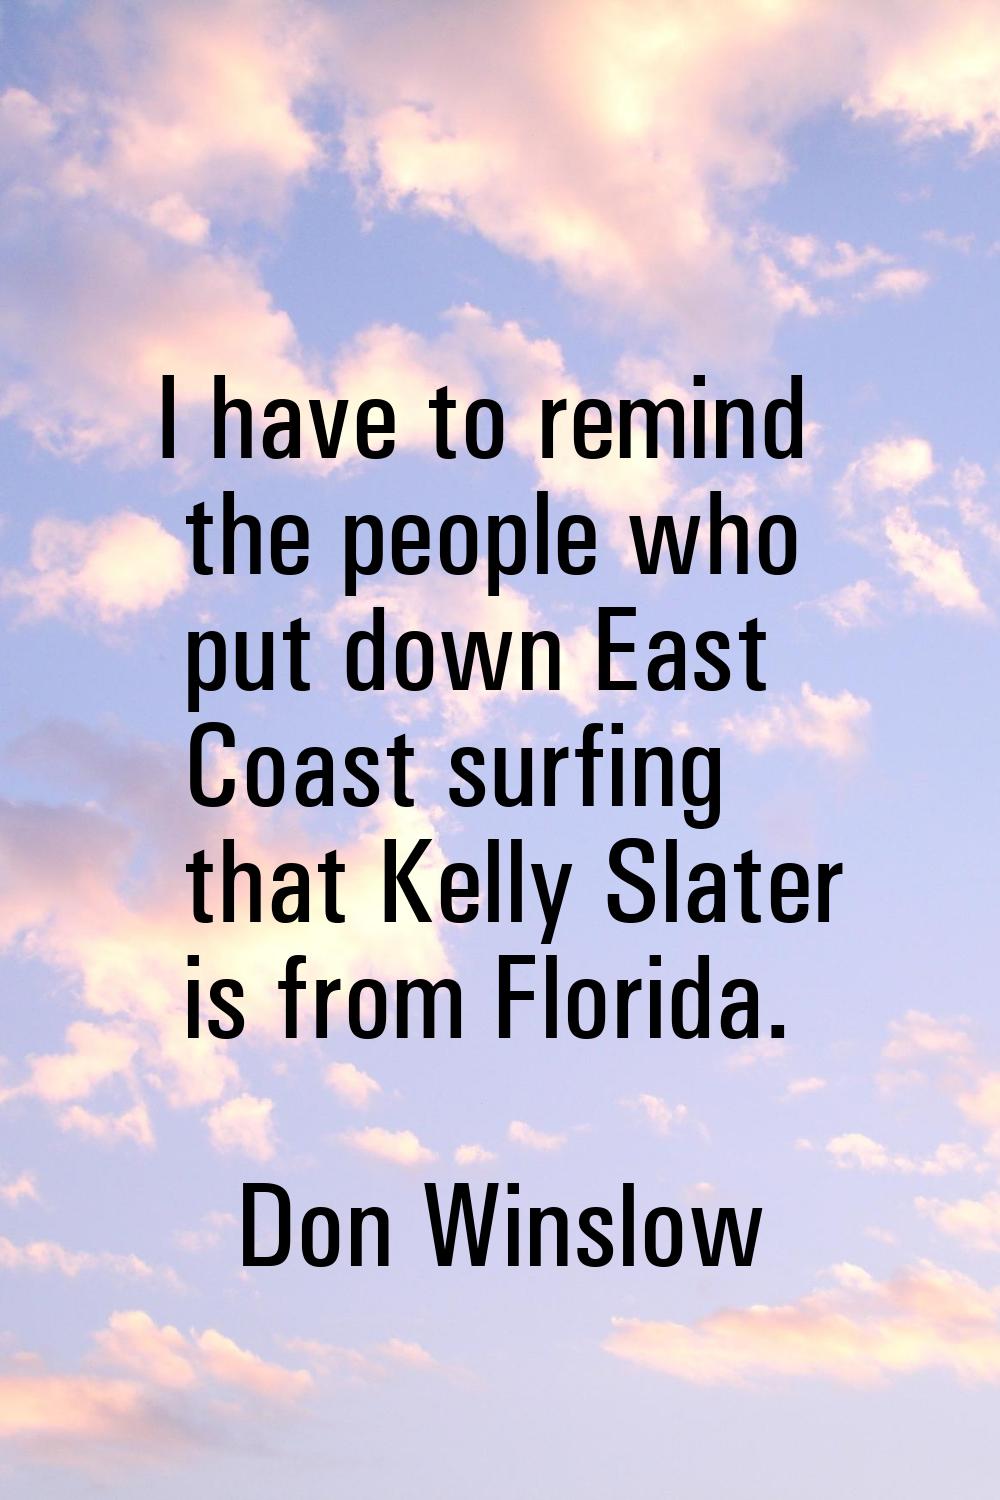 I have to remind the people who put down East Coast surfing that Kelly Slater is from Florida.